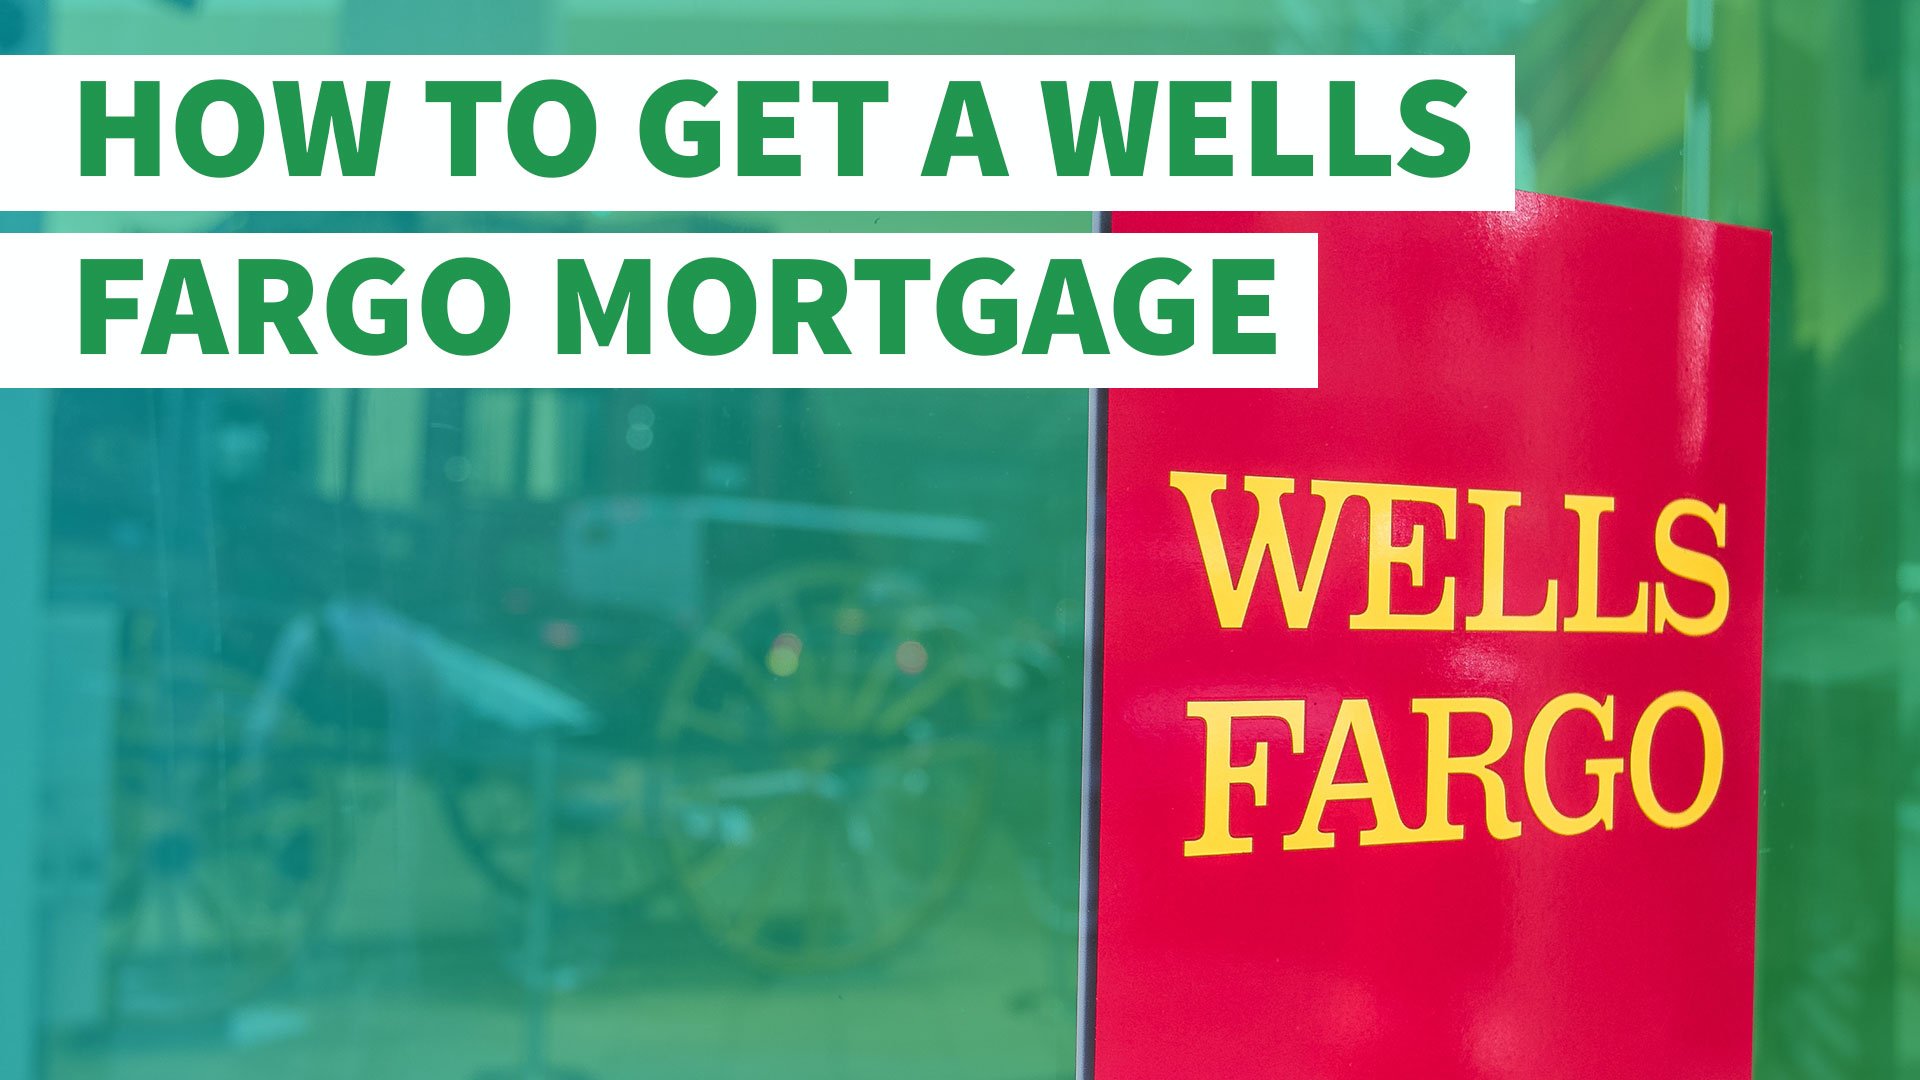 How to Get a Wells Fargo Mortgage